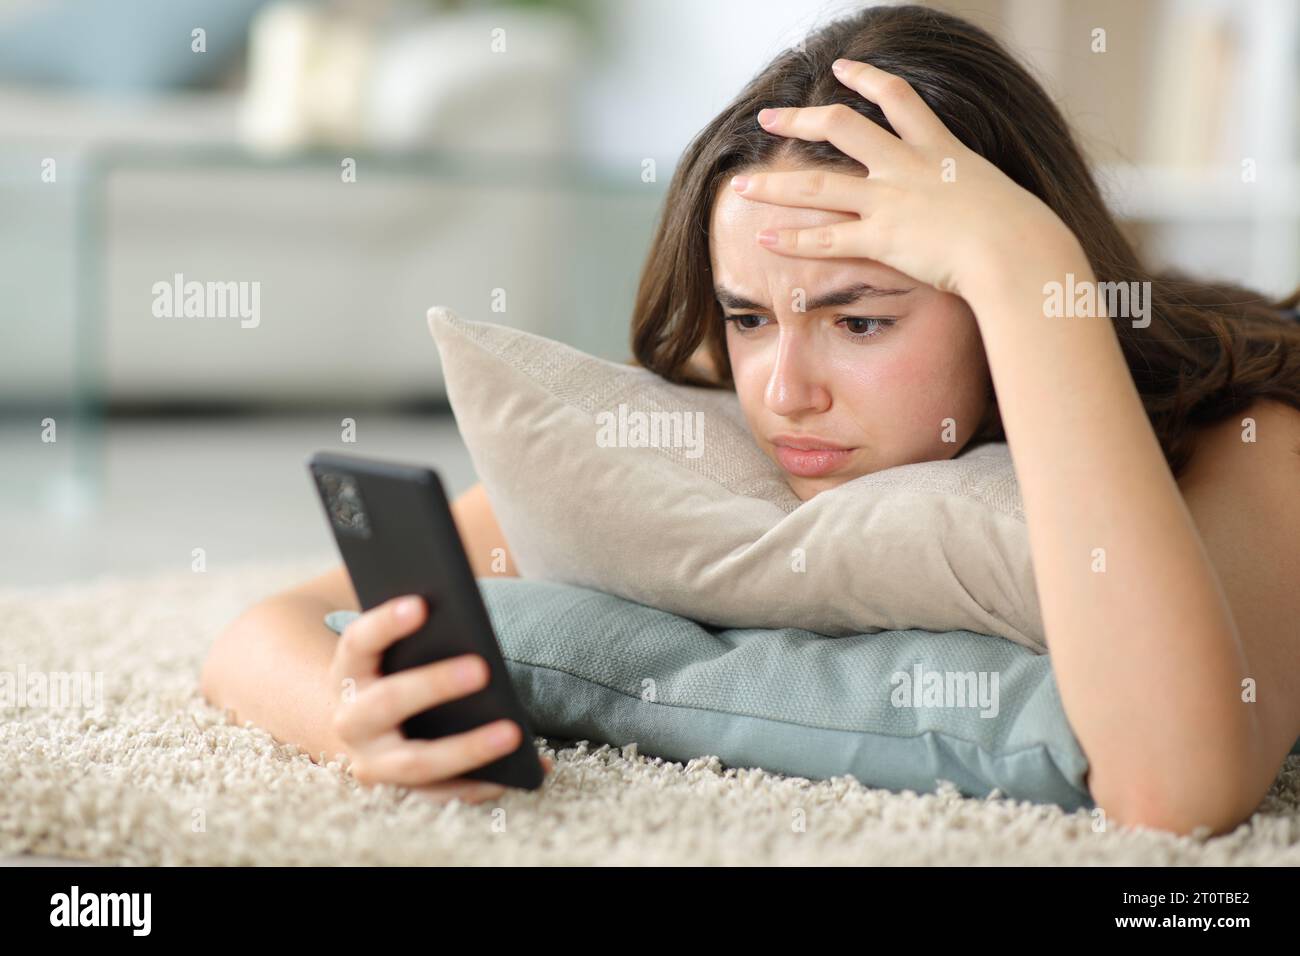 Worried woman checking phone lying on the floor at home Stock Photo